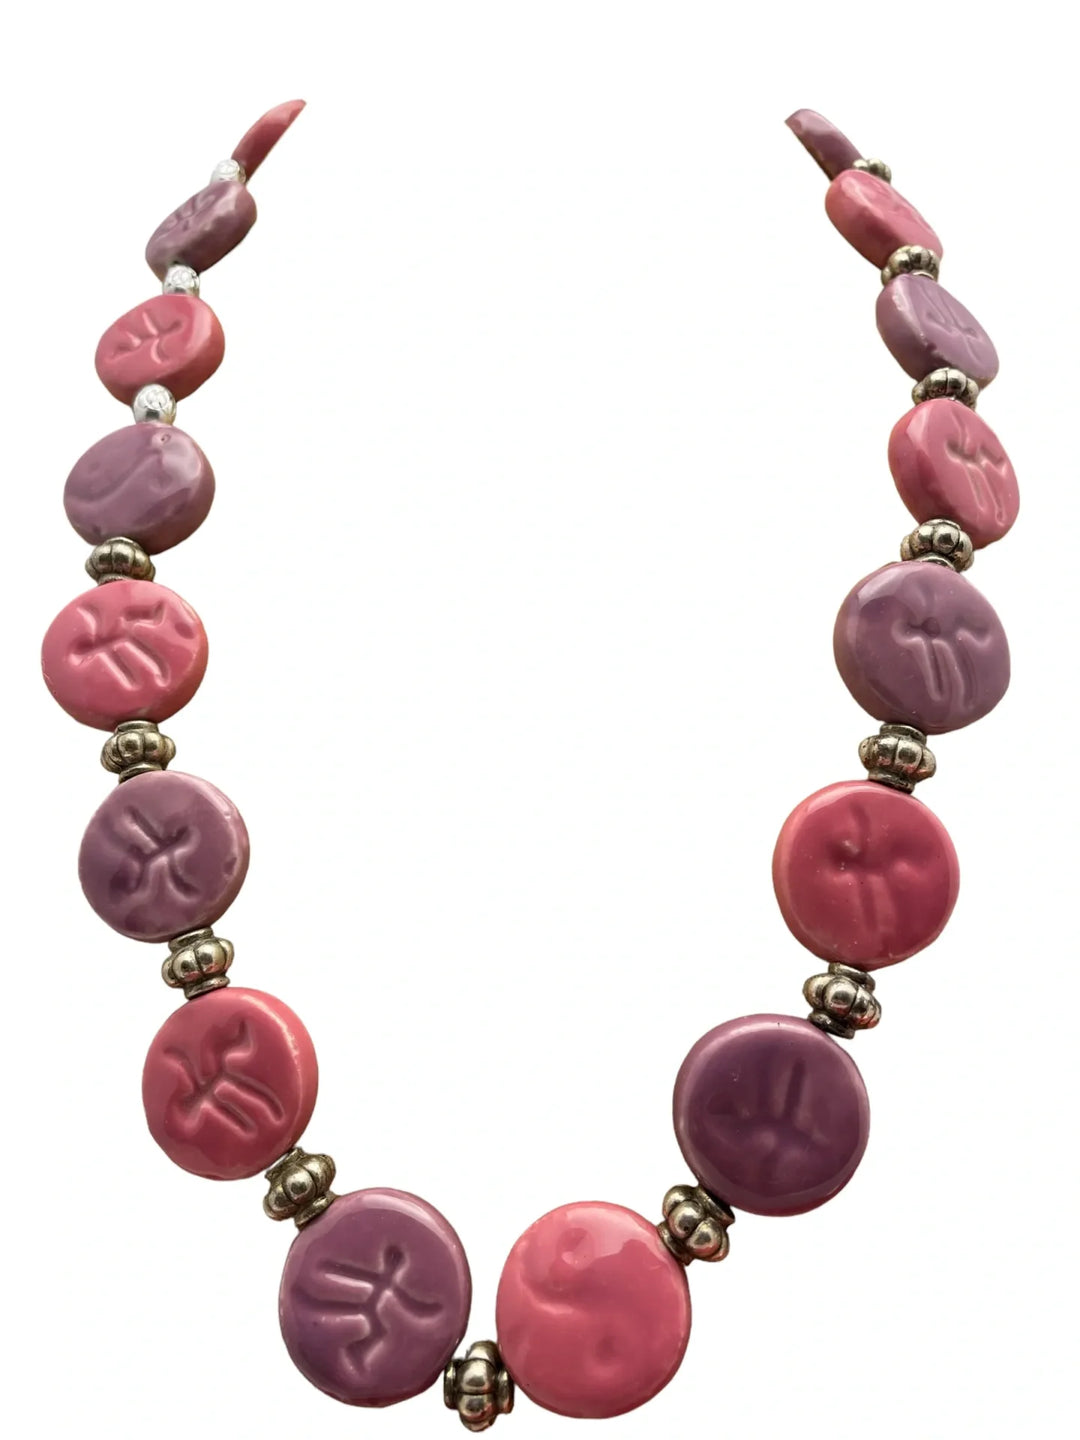 Lavender and Pink Ceramic Necklace